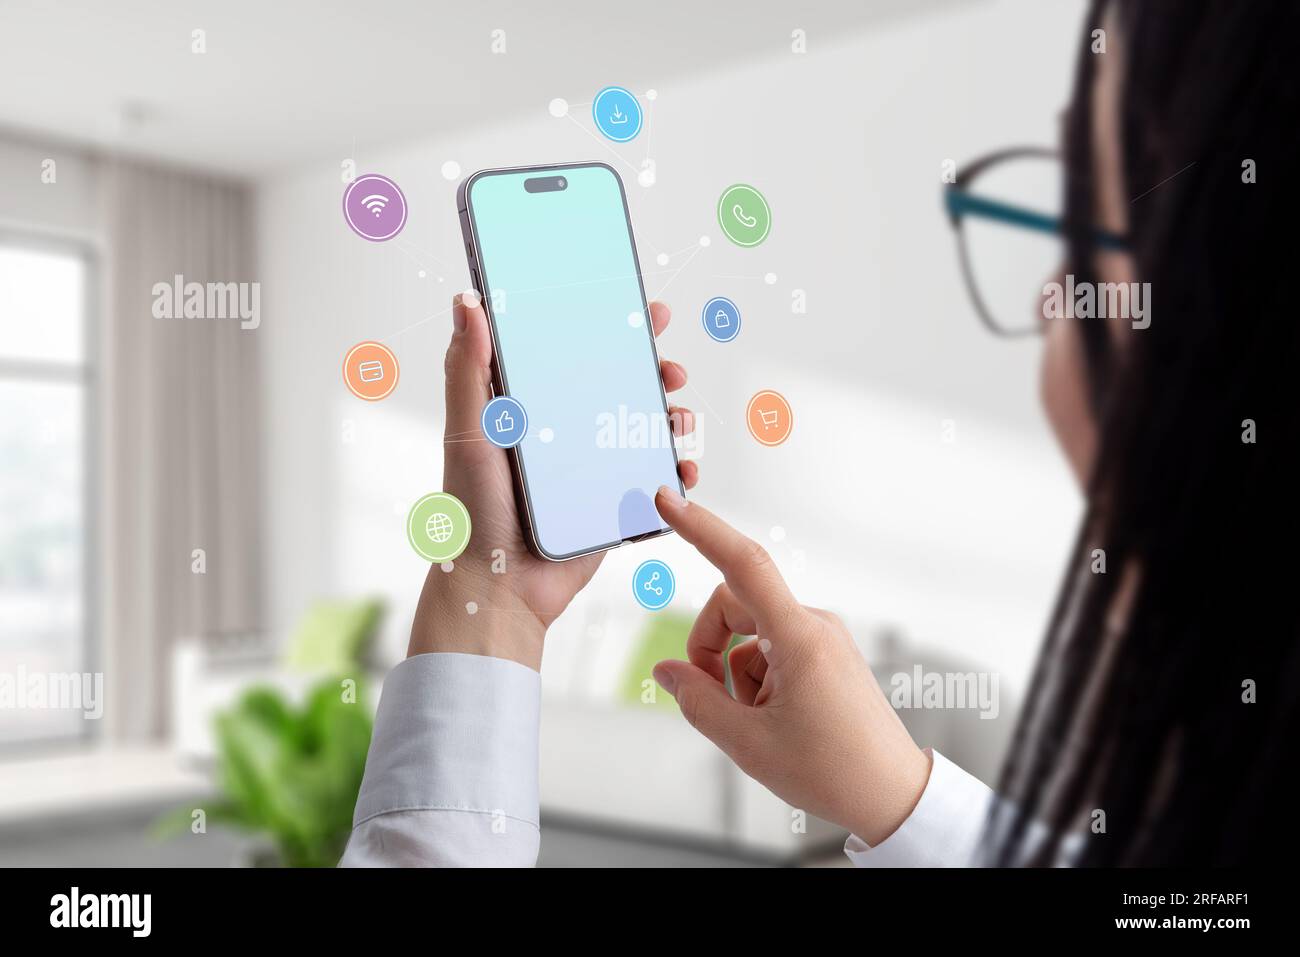 Social media icons, network nodes and smart phone in woman hands. Woman touch display of smart phone concept Stock Photo